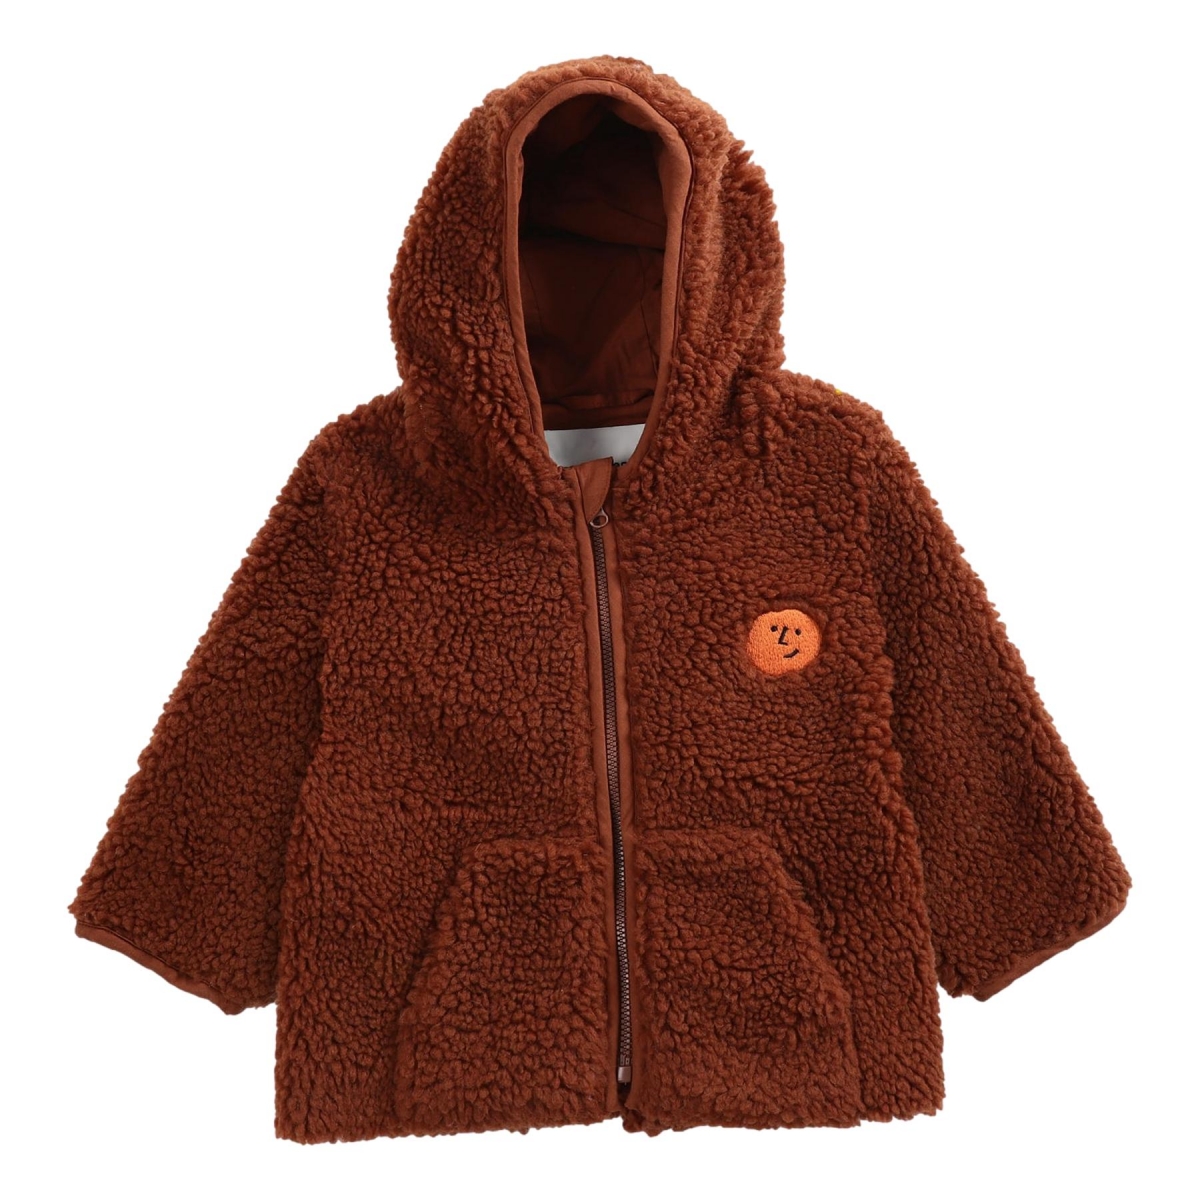 Bobo Choses Face Embroidery Jacket brown 221AB096 